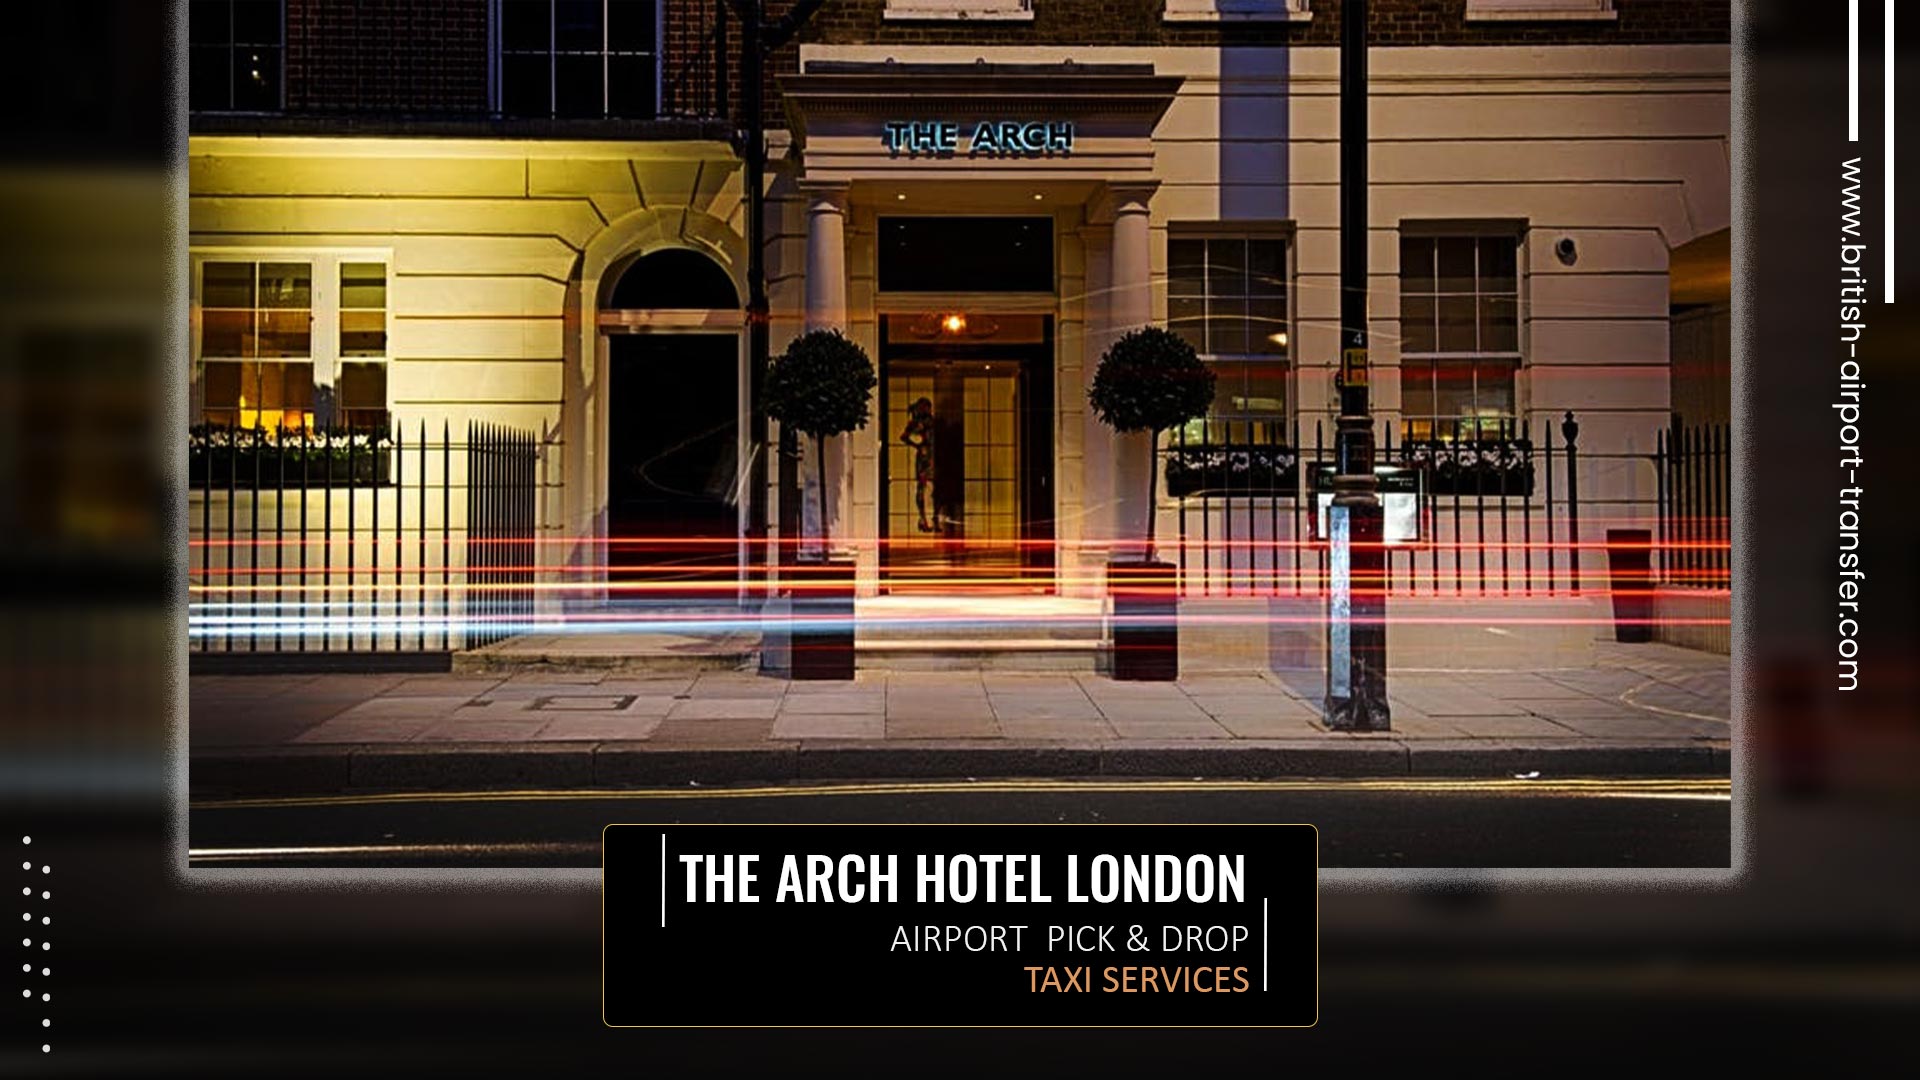 Taxi Cab – The Arch Hotel London / W1H 7FD